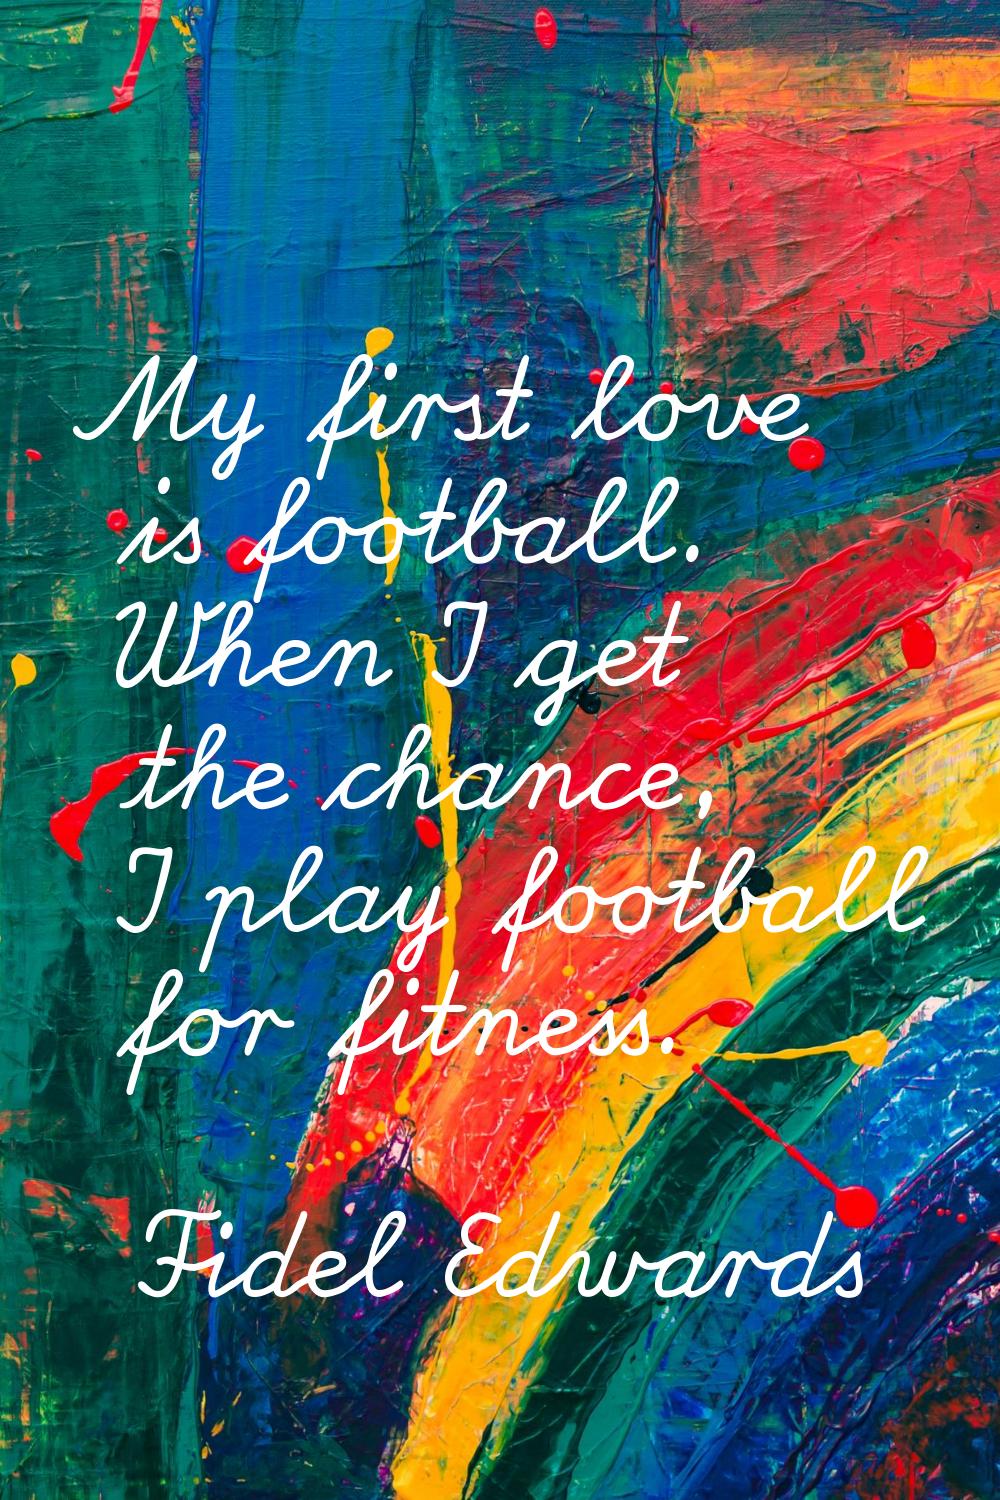 My first love is football. When I get the chance, I play football for fitness.